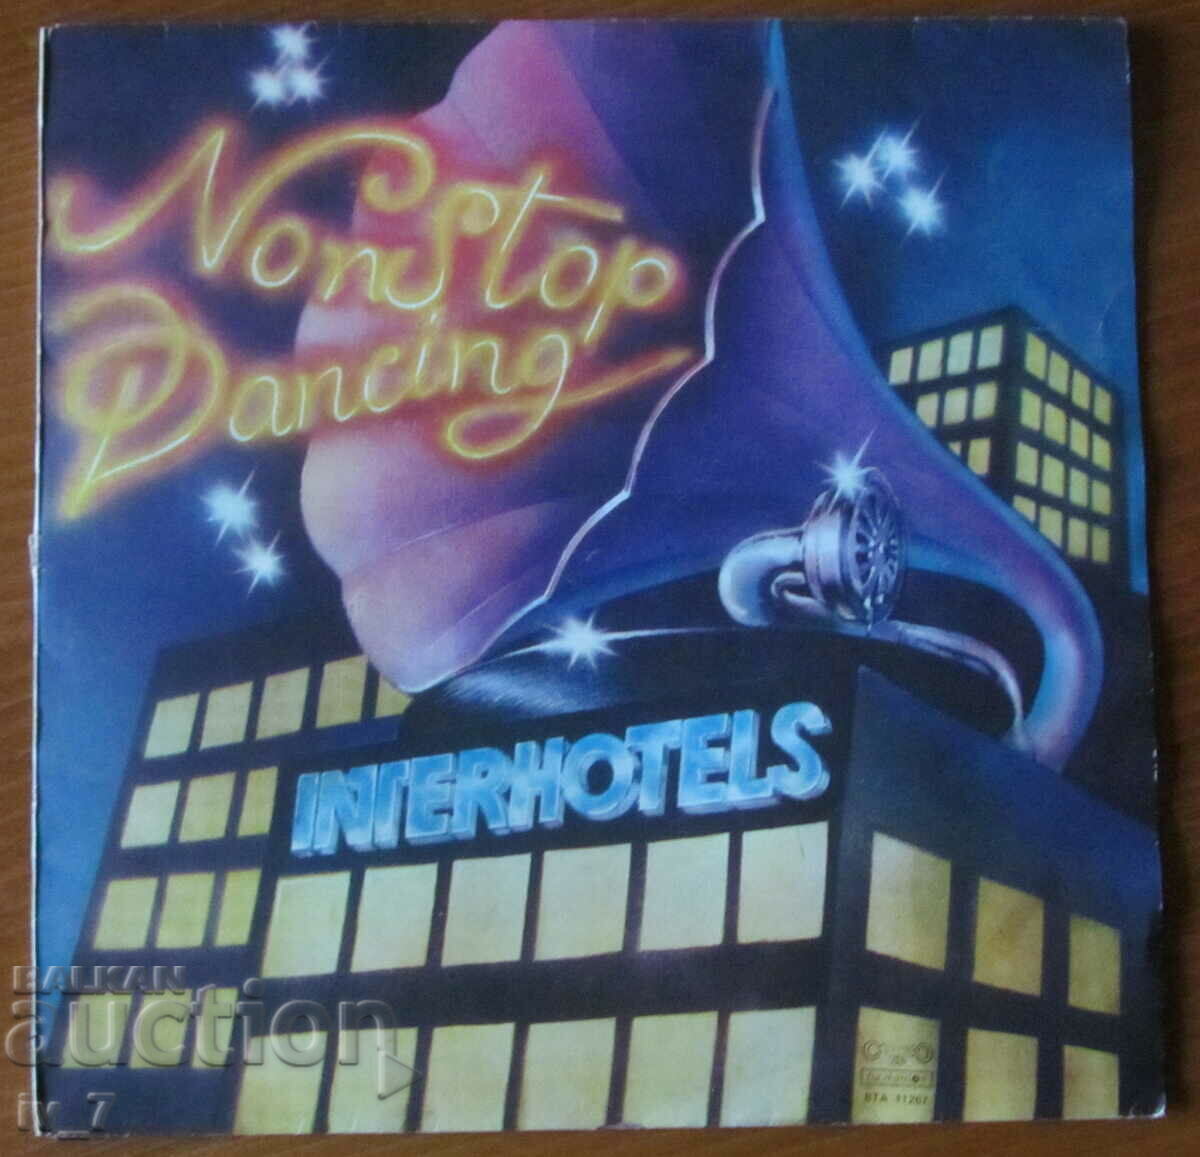 RECORD-Interhotels-"Non stop dance ring", format mare